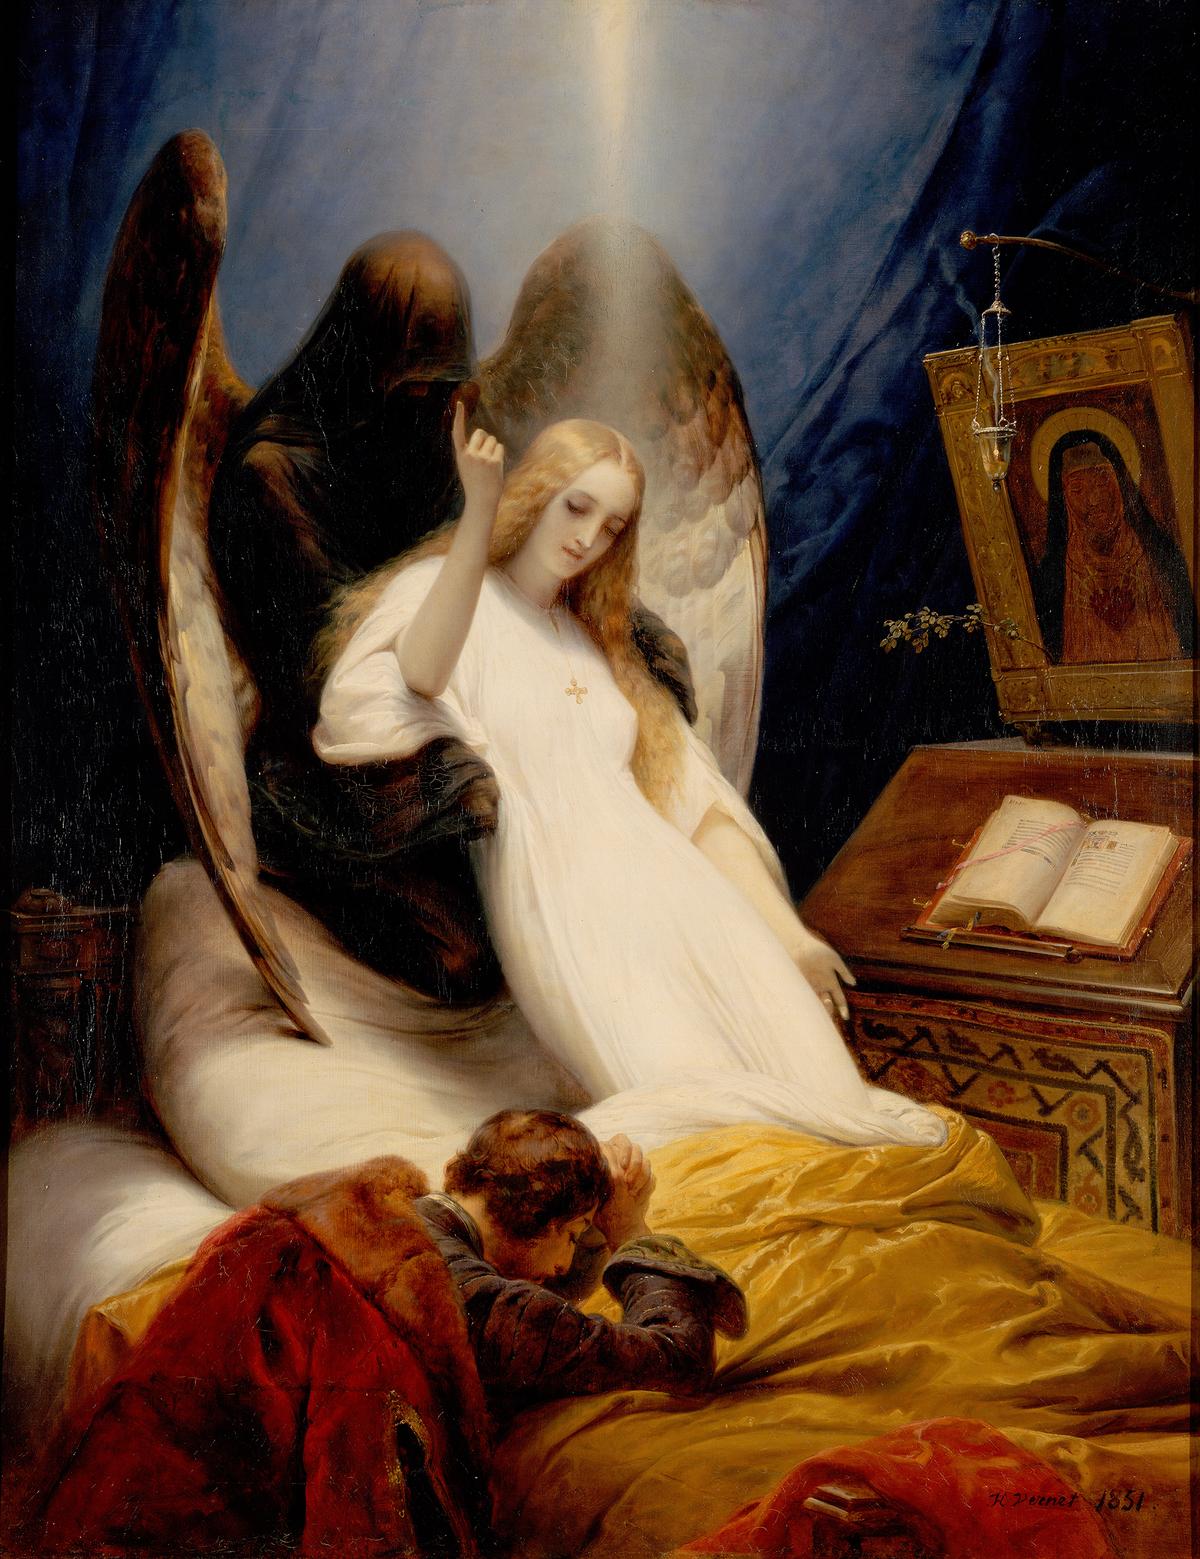 "The Angel of Death," 1851, by Horace Vernet. Oil on canvas. Hermitage Museum, St. Petersburg, Russia. (Public Domain)